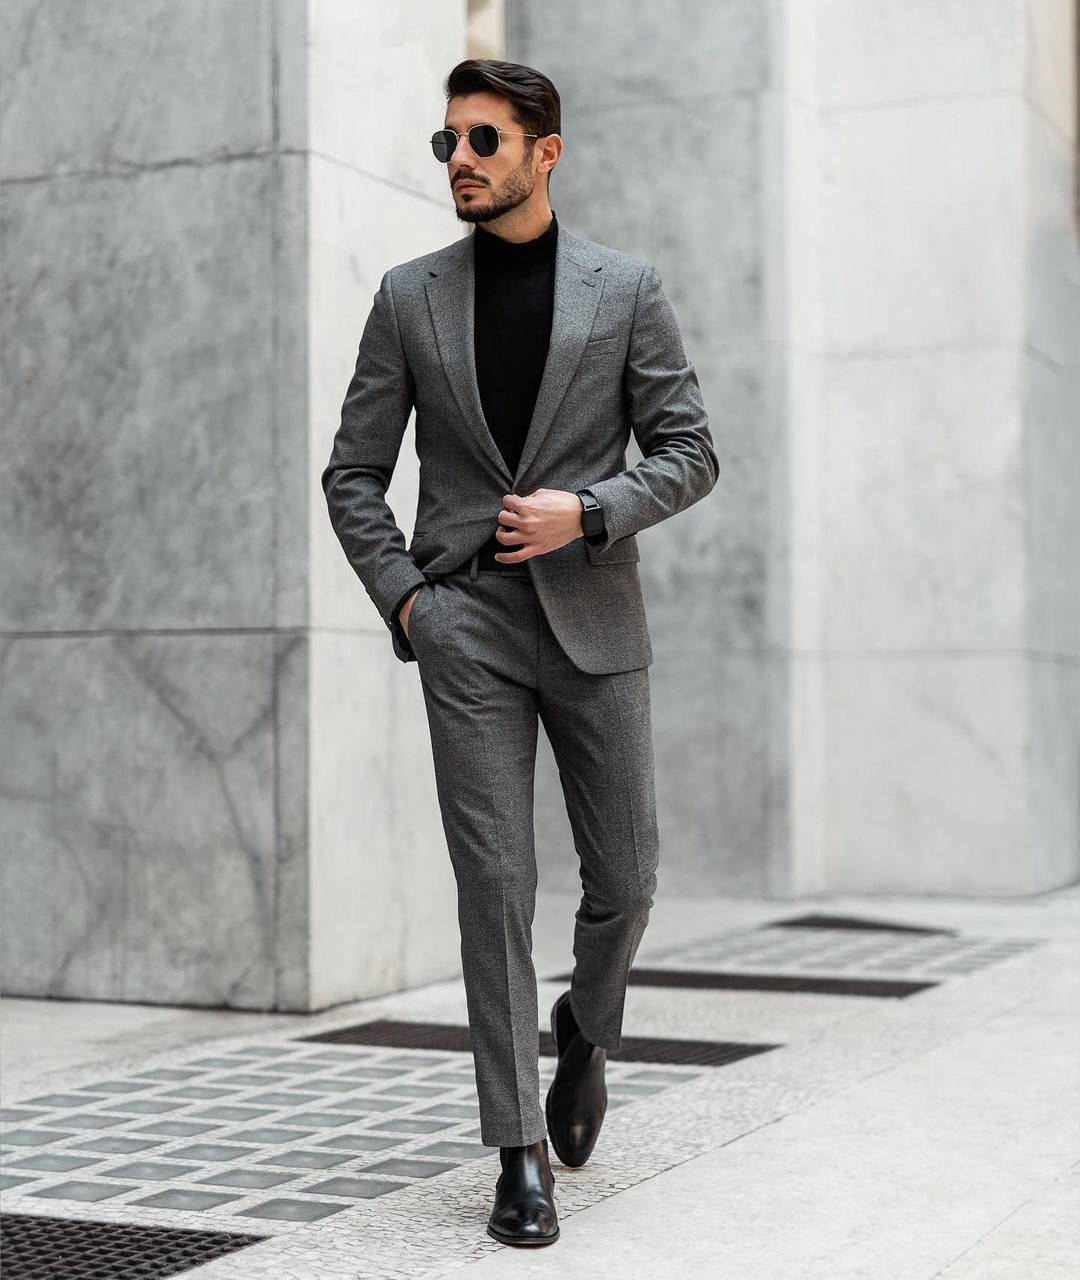 How to Master the Turtleneck with a Suit Look - Suits Expert